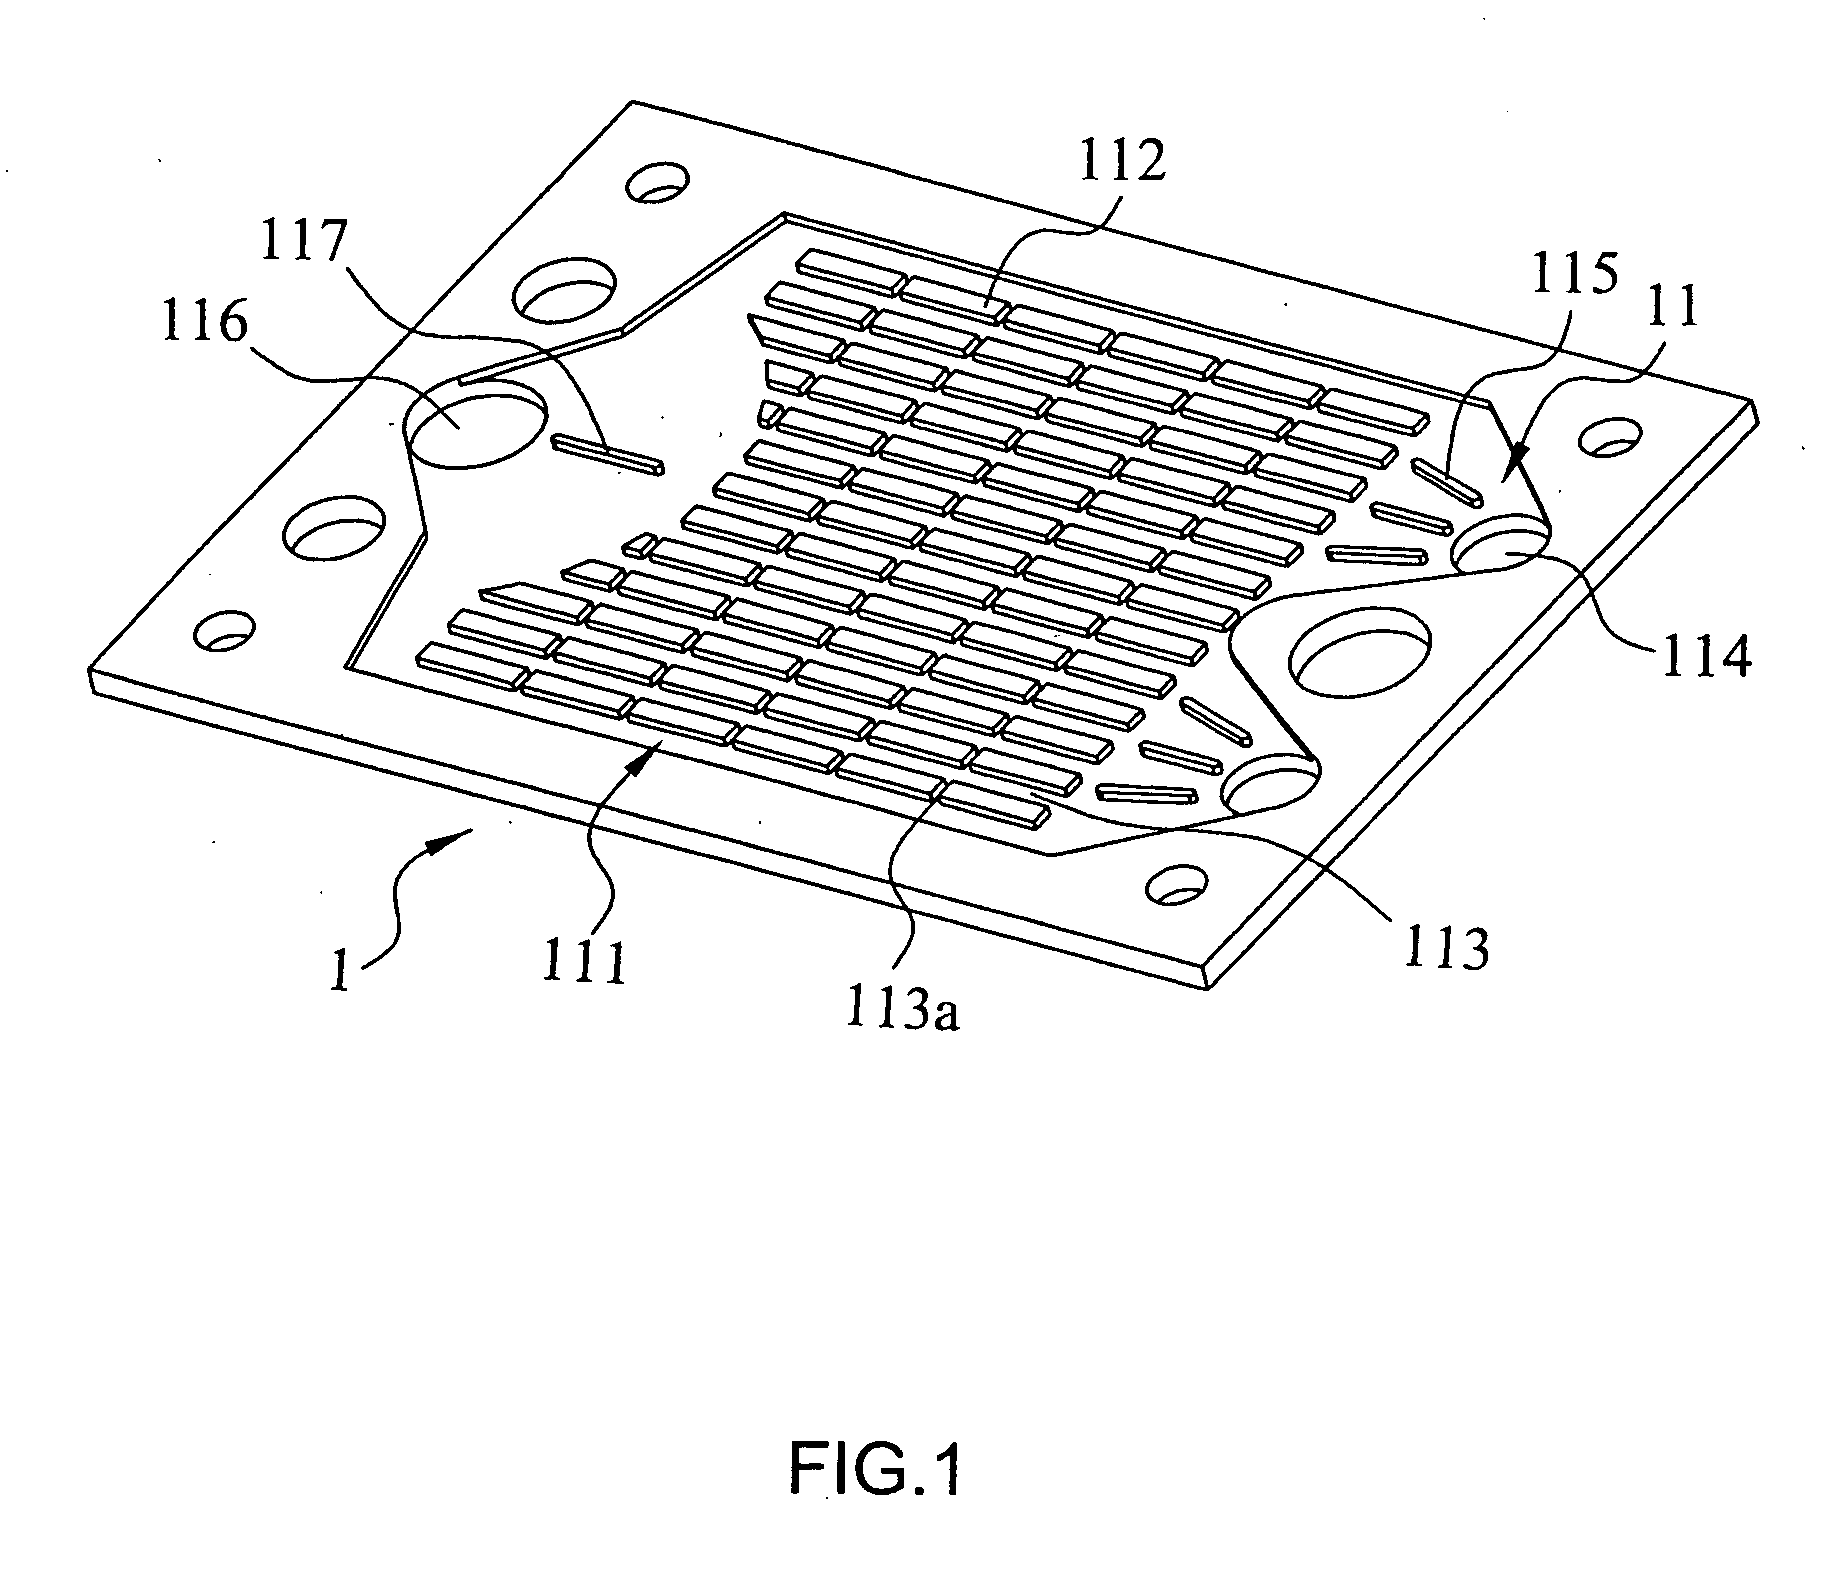 Flow channel on interconnect of planar solid oxide fuel cell